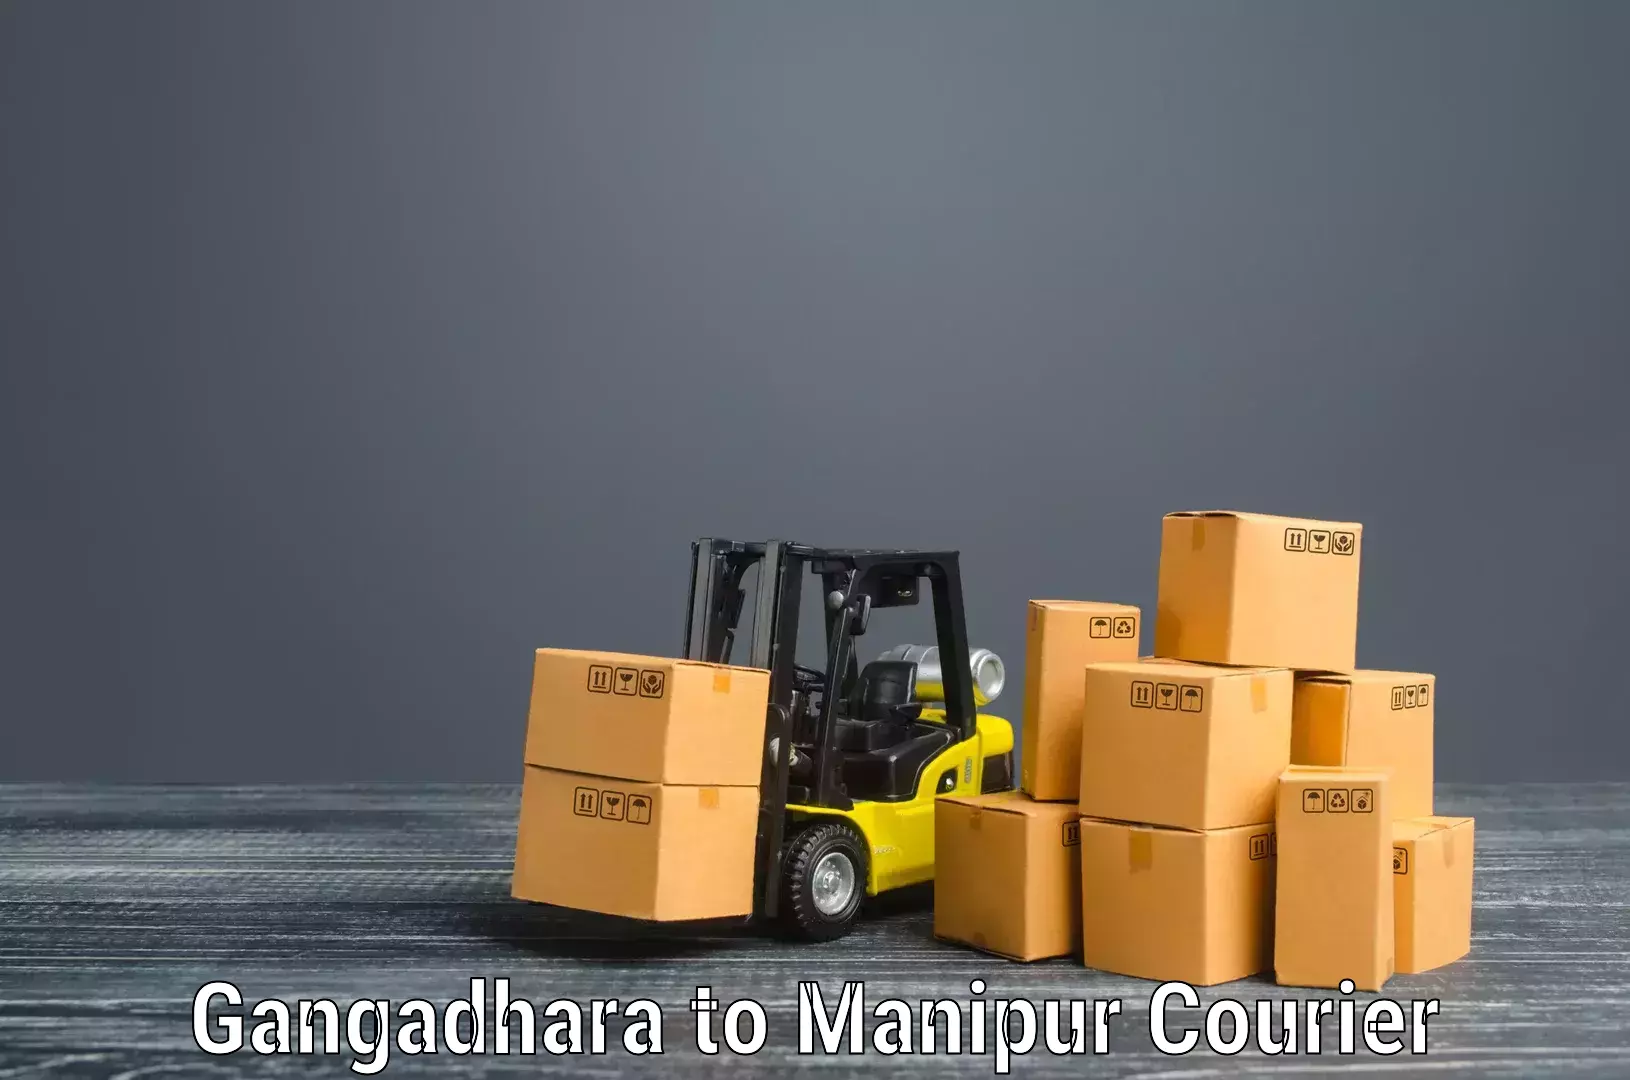 Furniture transport specialists Gangadhara to Imphal